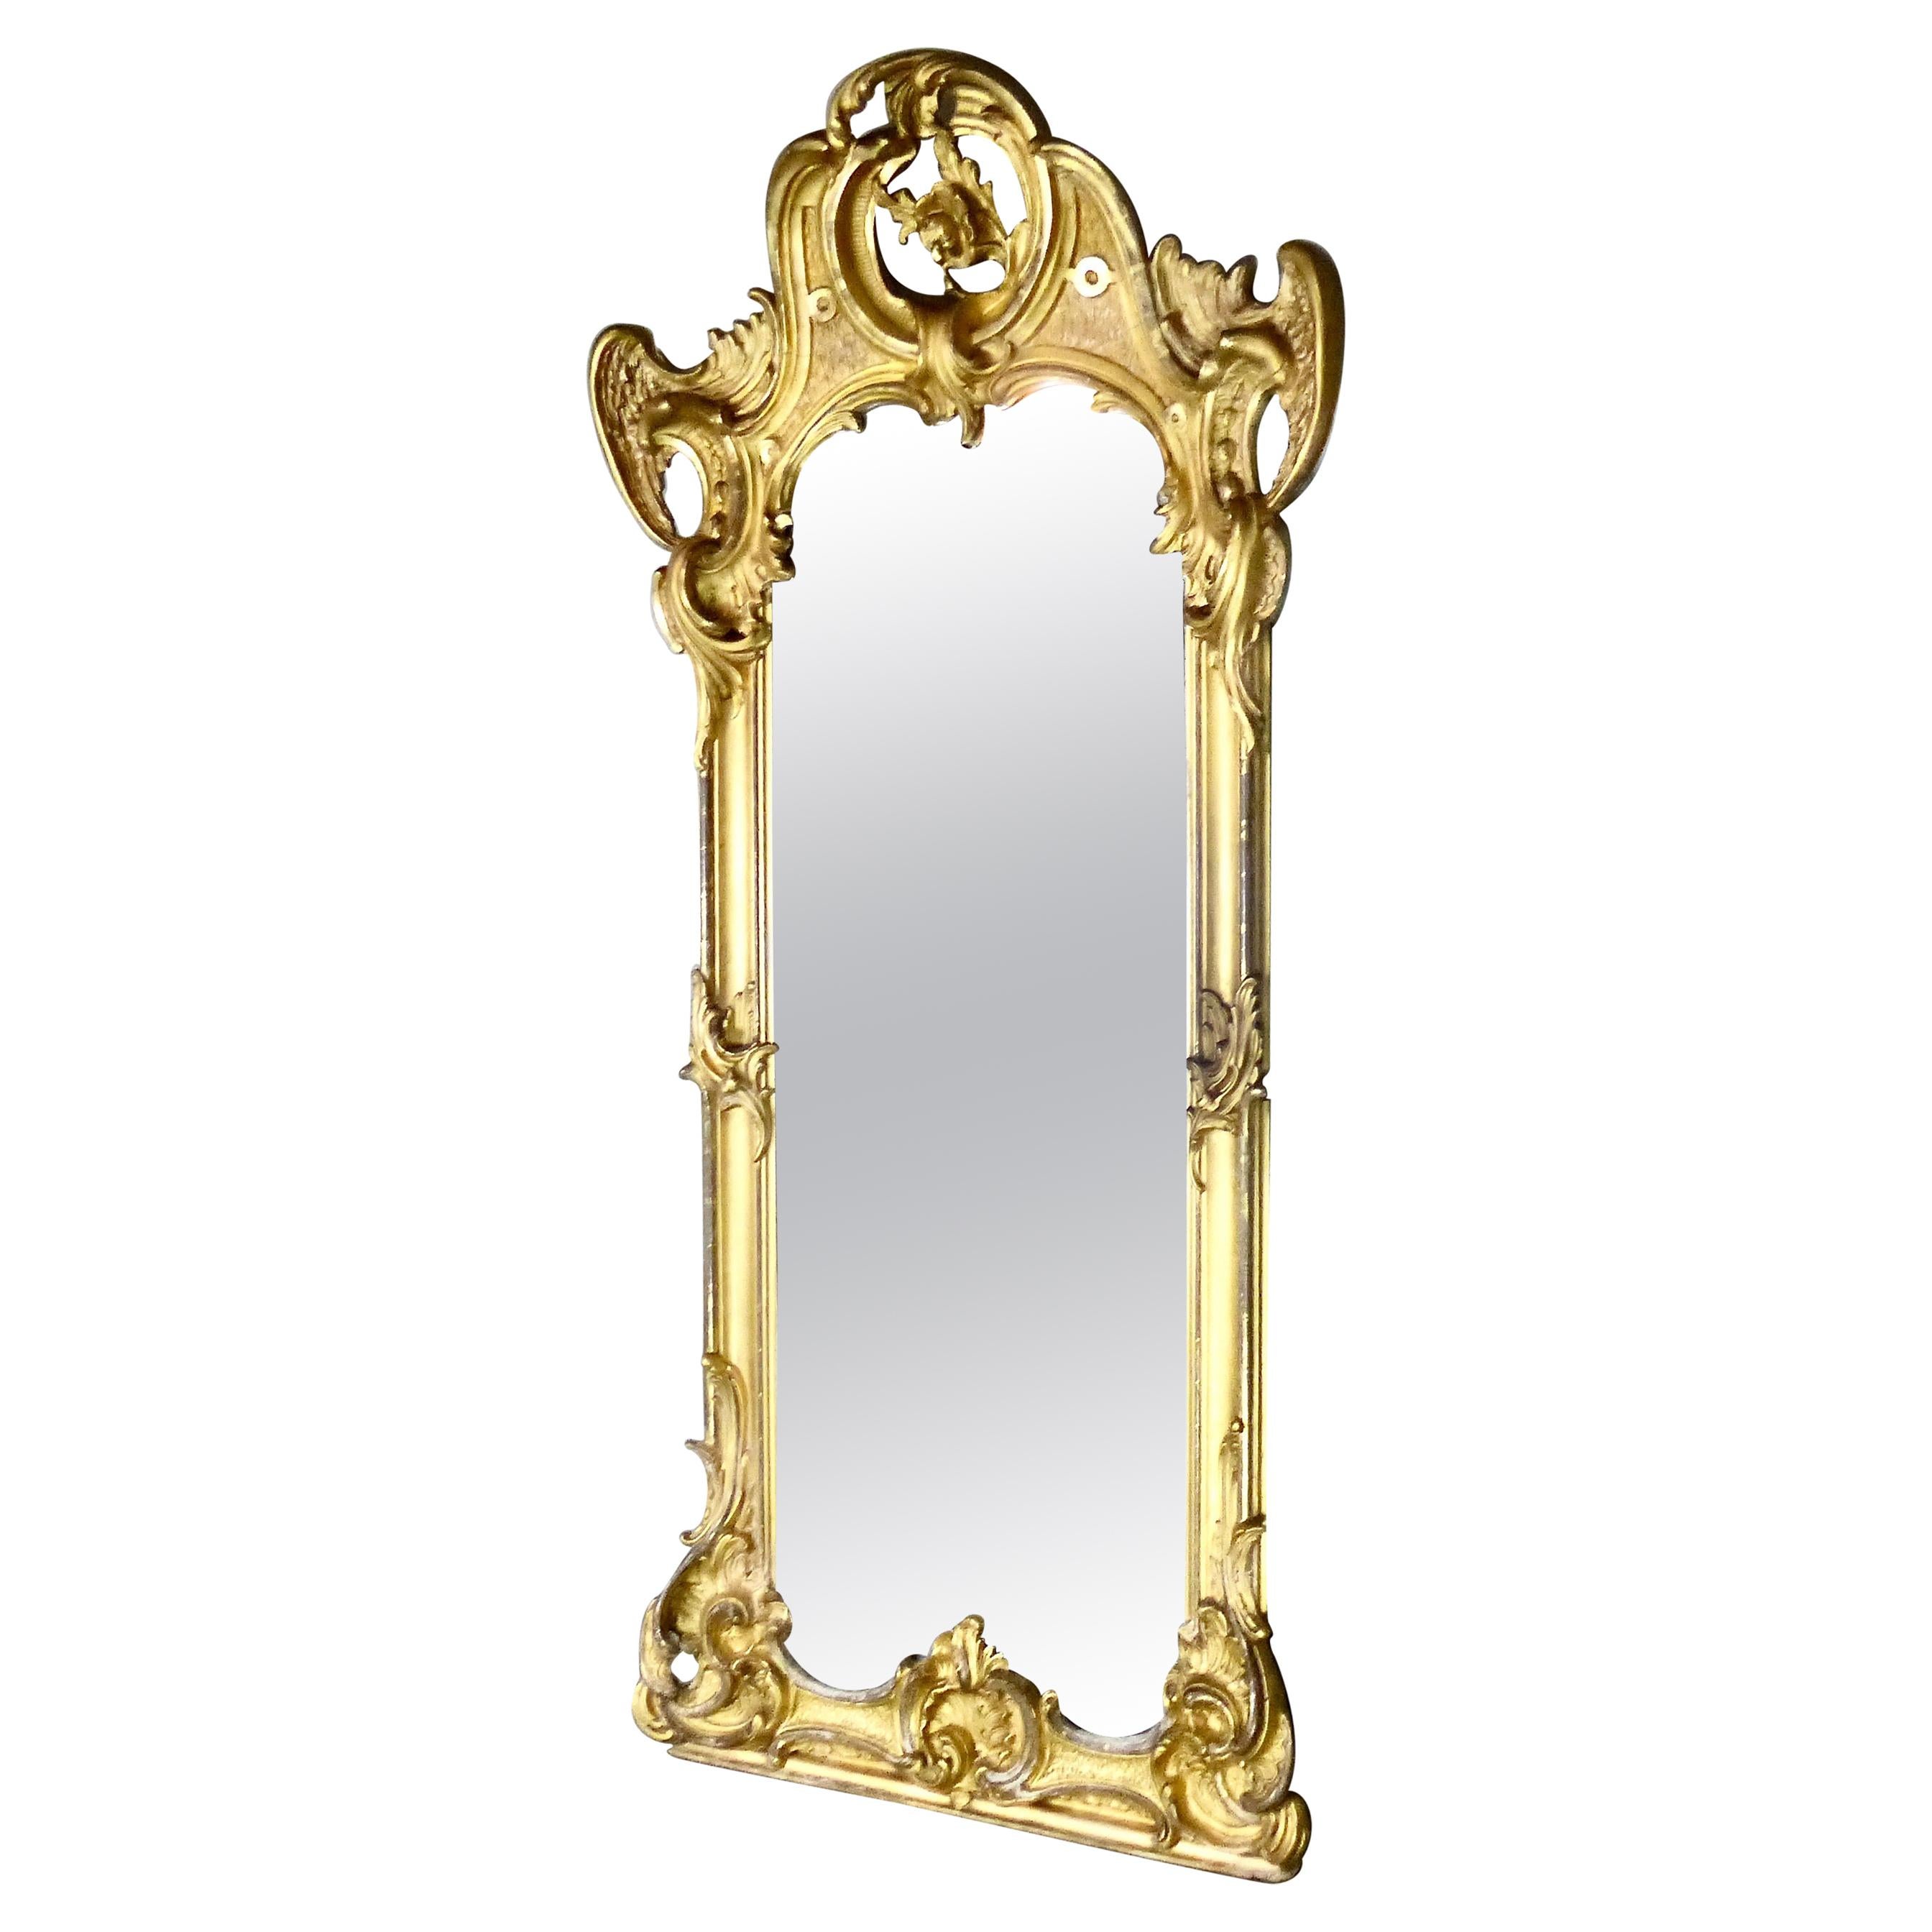 Spectacular French Water Gilt Mirror with Accented Carved Angel Wings circa 1840